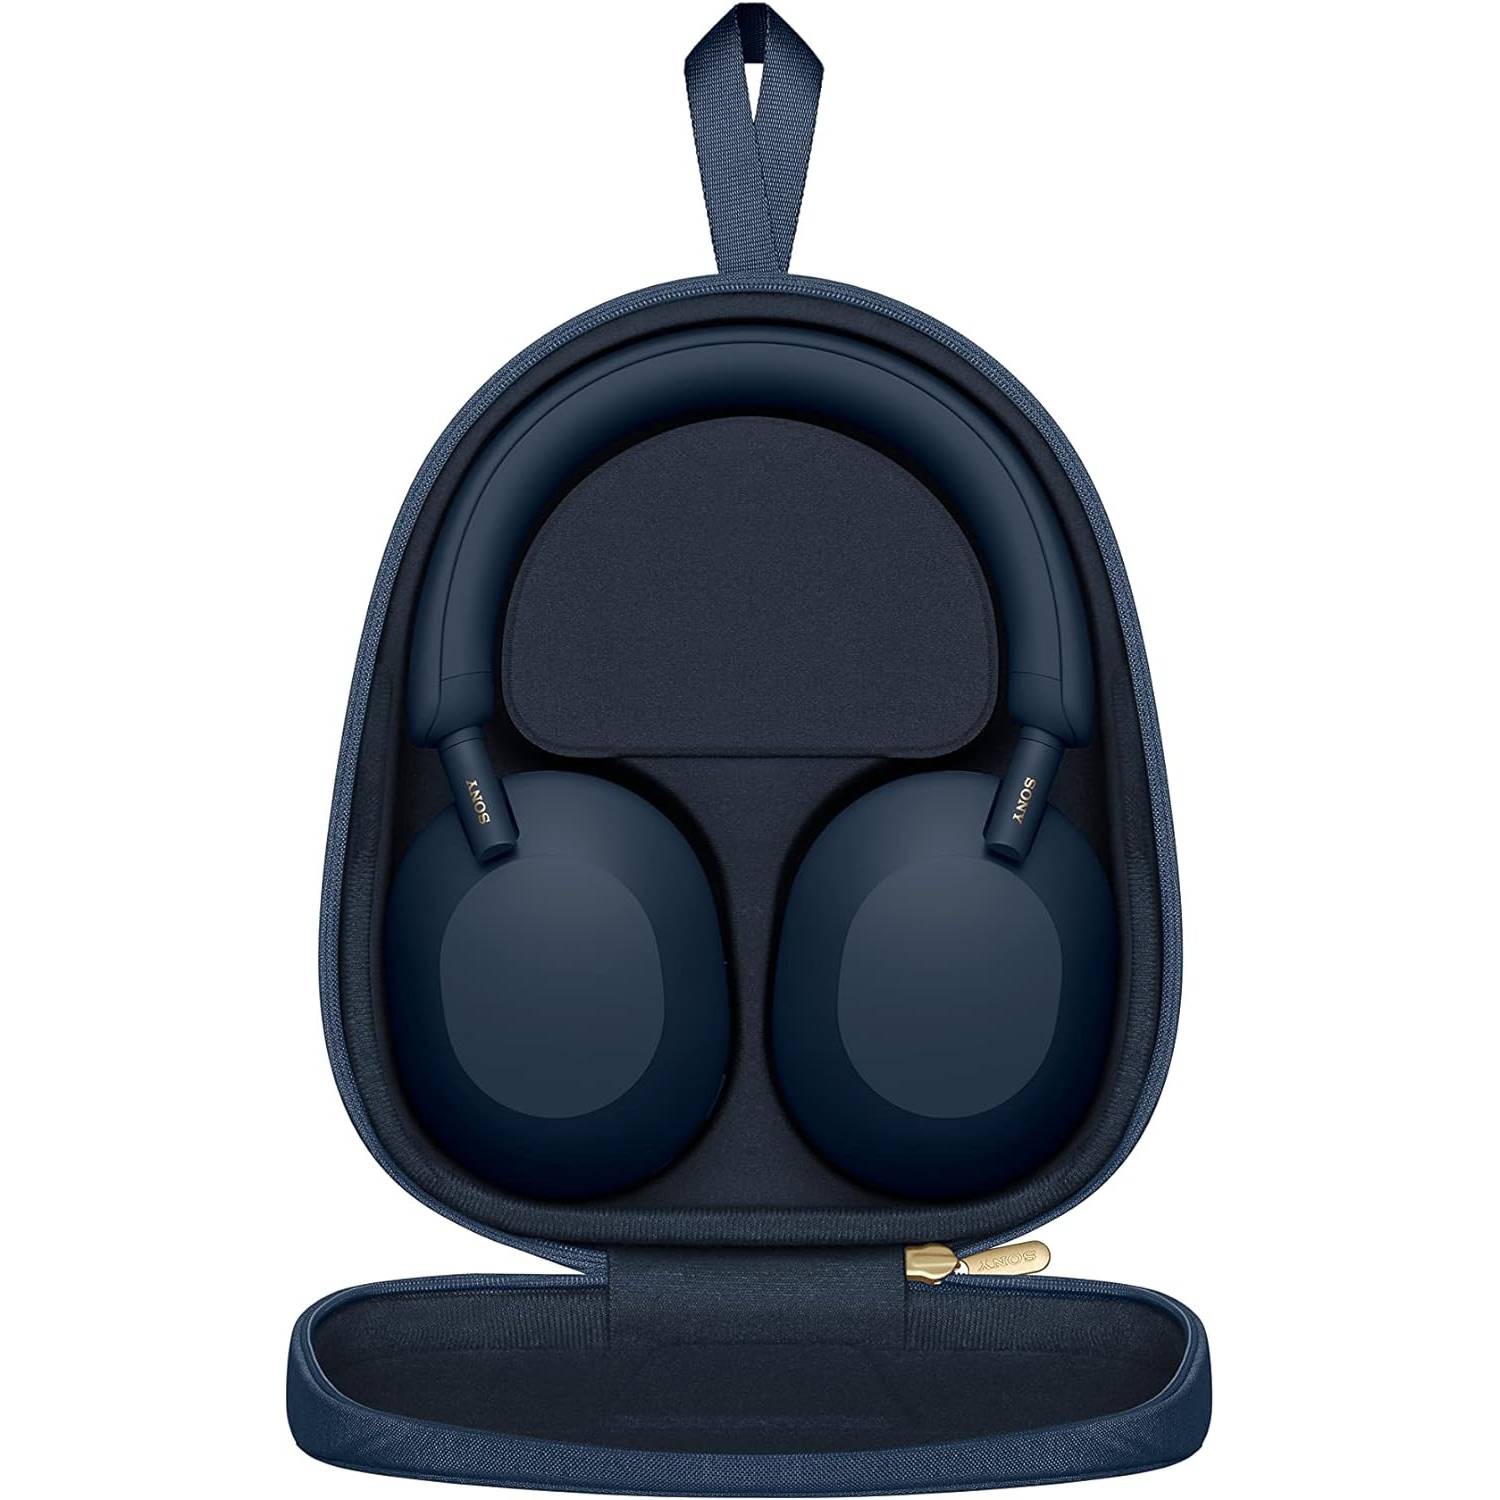 Buy WH-1000XM5 Wireless Noise Cancelling Headphones, Midnight Blue, Sony  Store Online